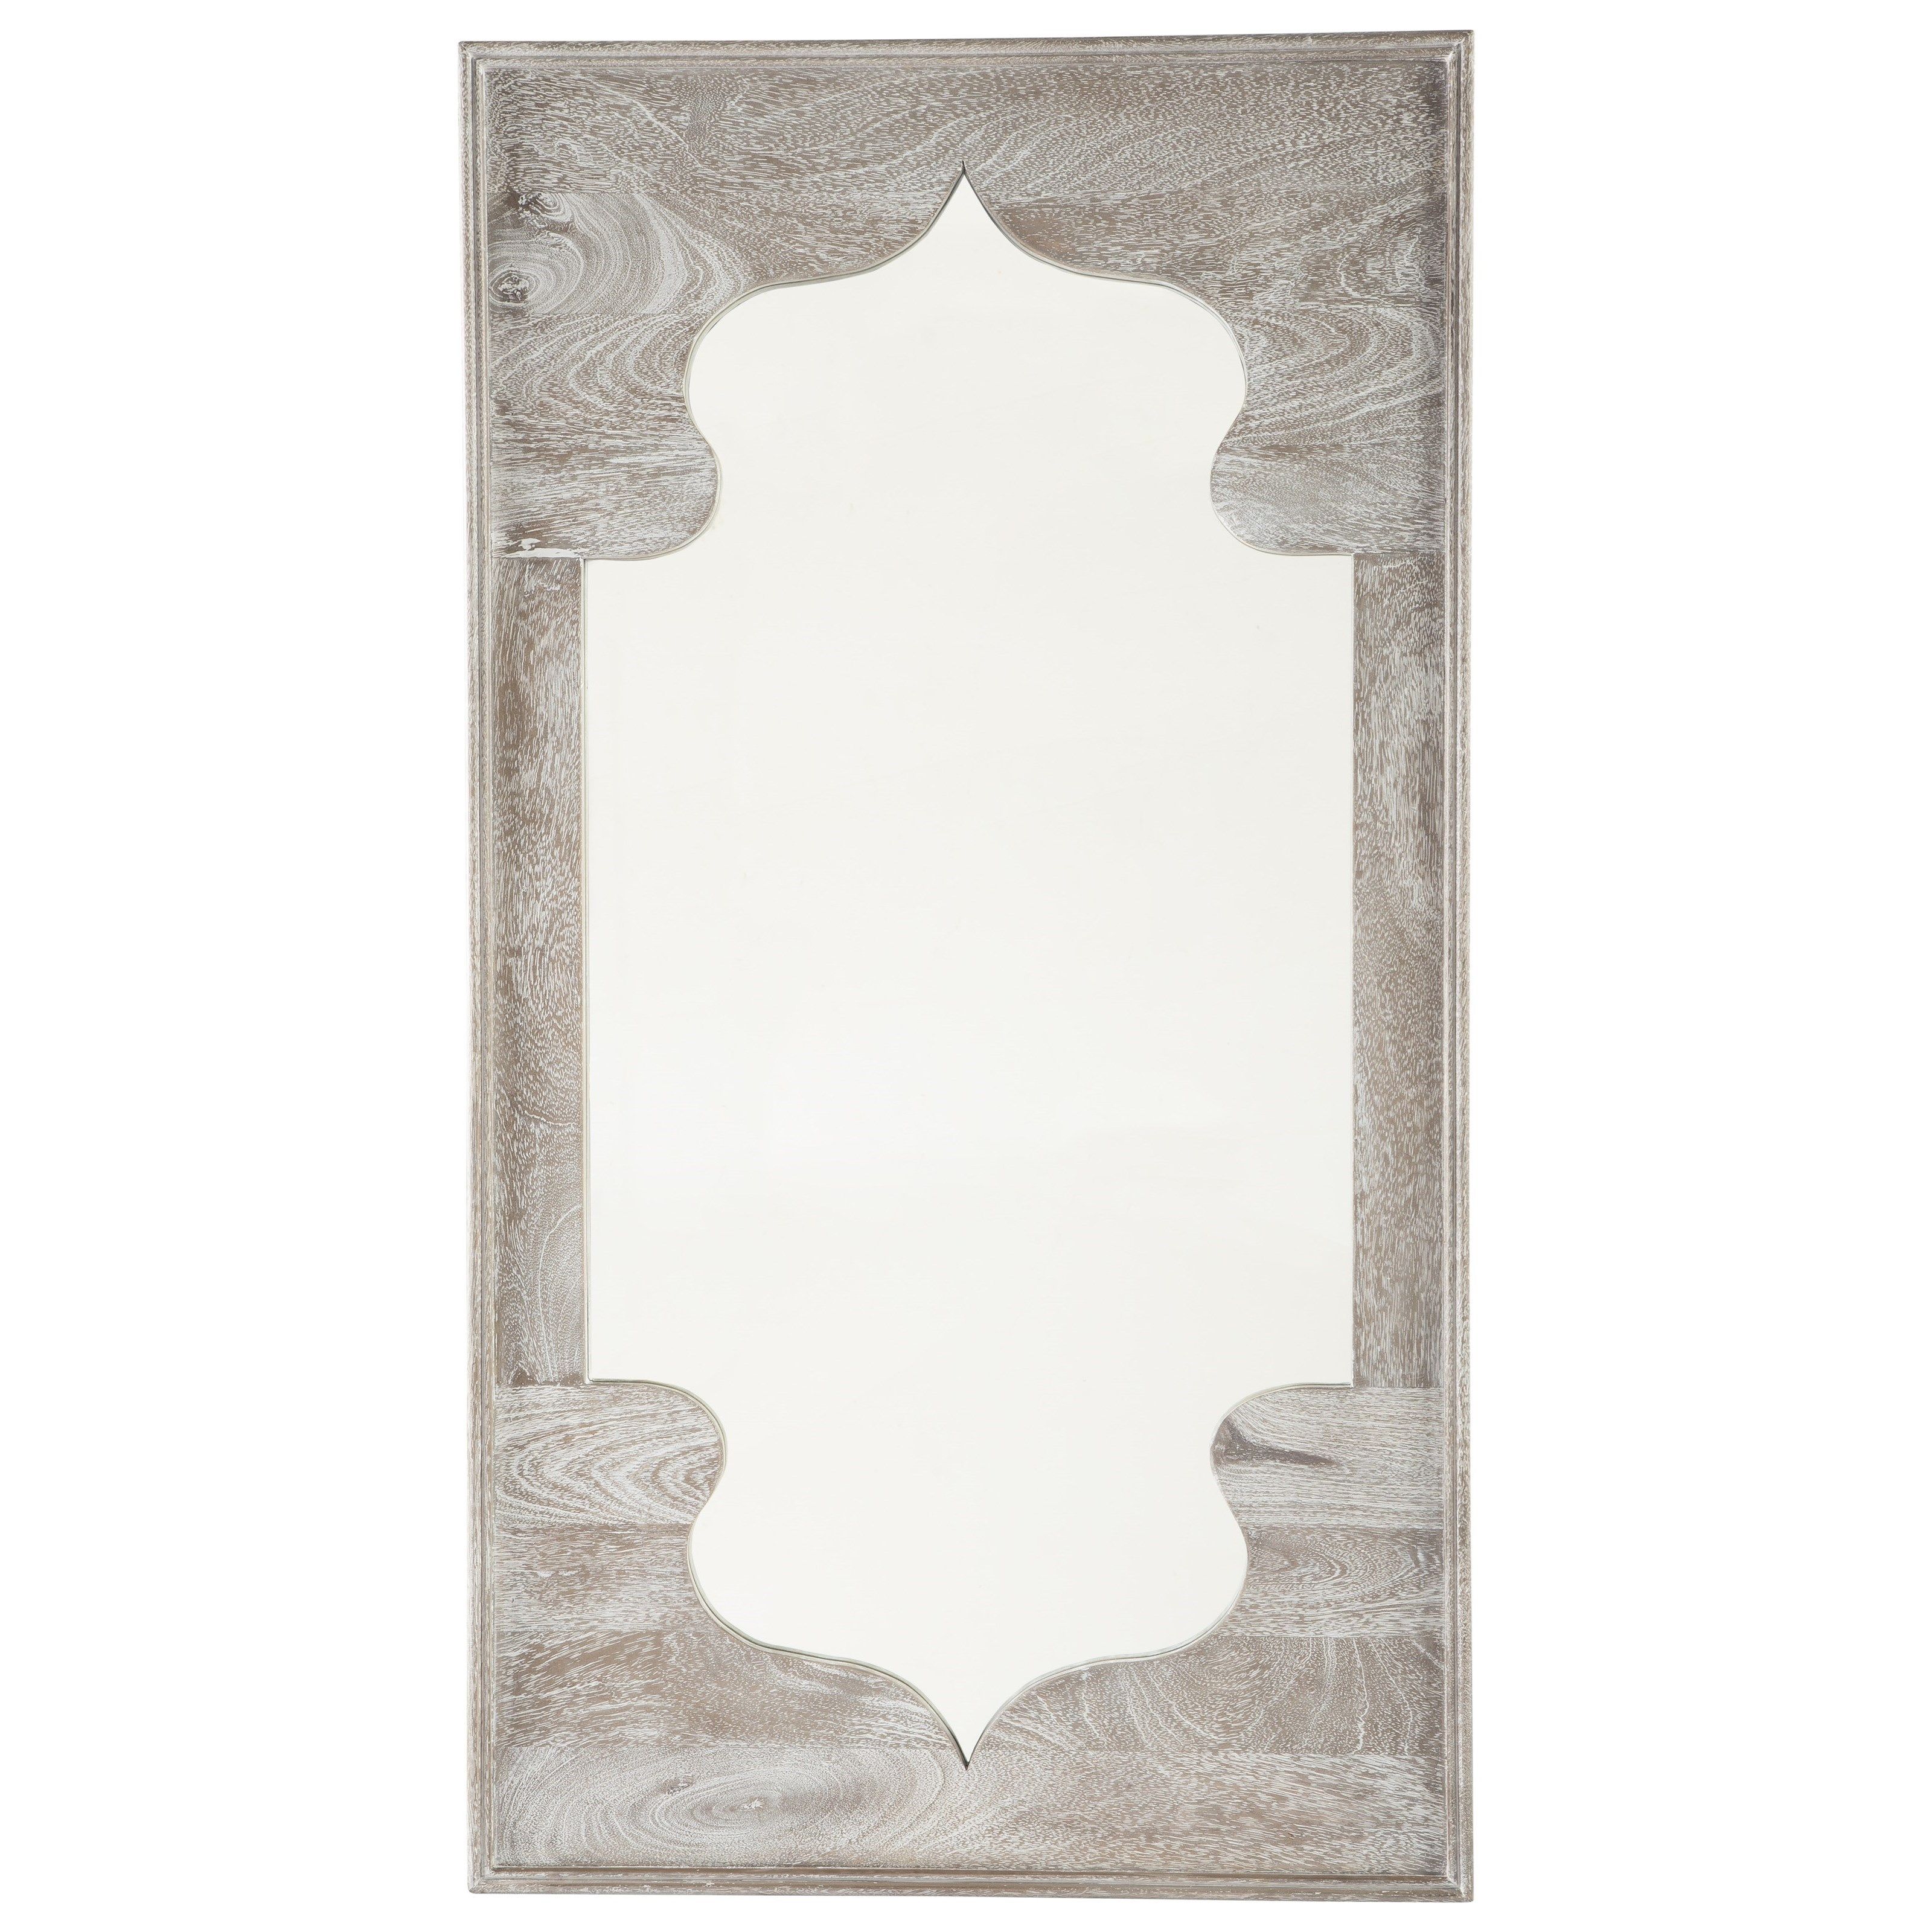 Accent Mirrors Bautista Antique Gray Accent Mirrorsignature Design Ashley At Furniture And Appliancemart Within Accent Mirrors (View 17 of 20)